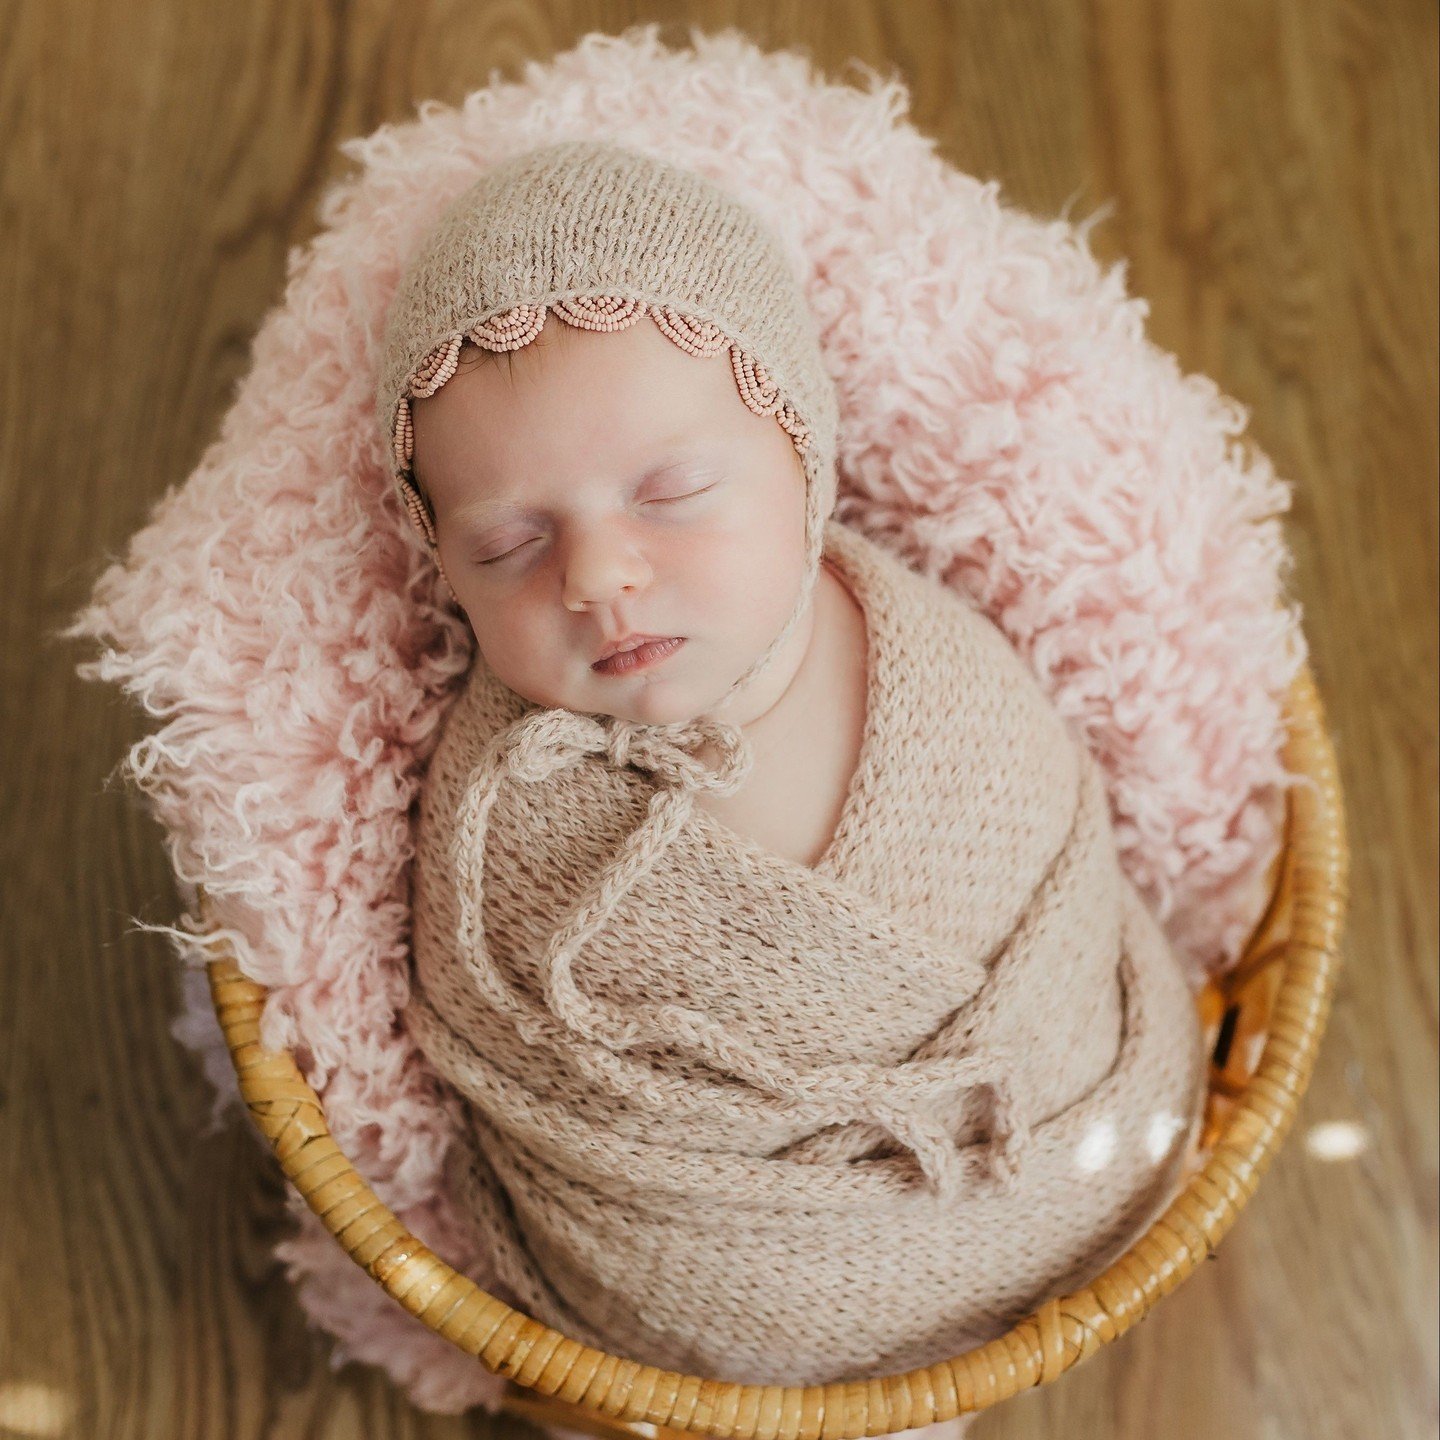 Newborn sleeping photos need to be taken before the baby is 15 days old! If you are looking for this option, keep in mind that the timing is everything 💞⁠
.⁠
.⁠
.⁠
.⁠
.⁠
.⁠
.⁠
#bayarea #bayareamoms #bayareakids #bayareaphotographer #bayareanewbornph